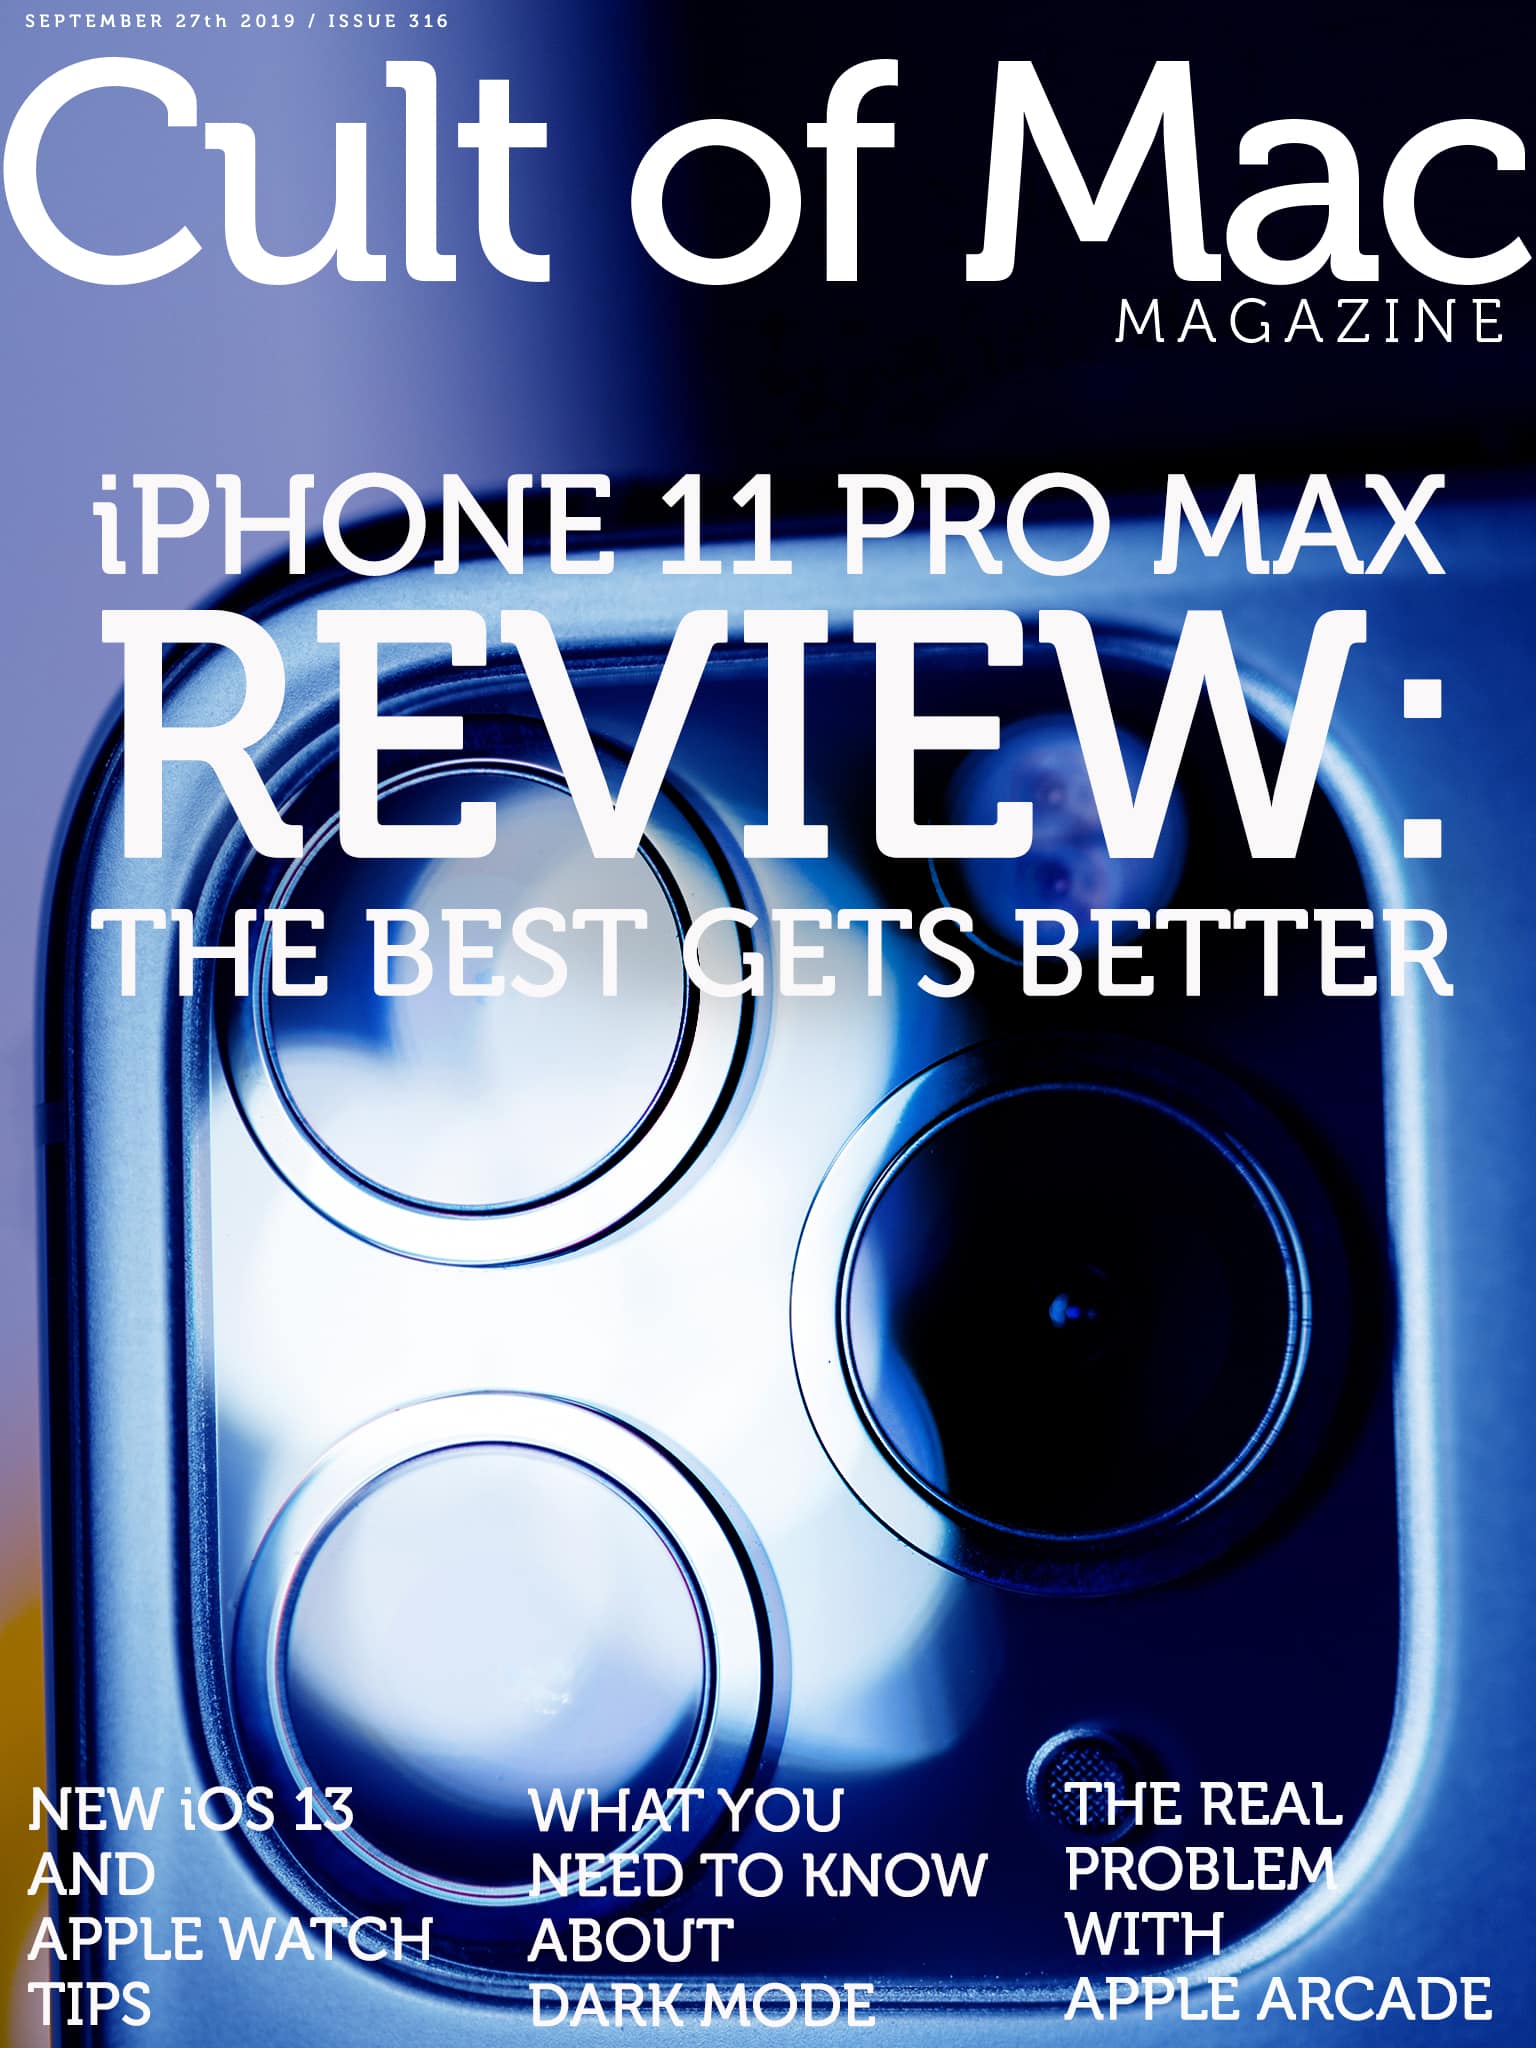 Hands down, the iPhone 11 Pro Max is our favorite iPhone yet.